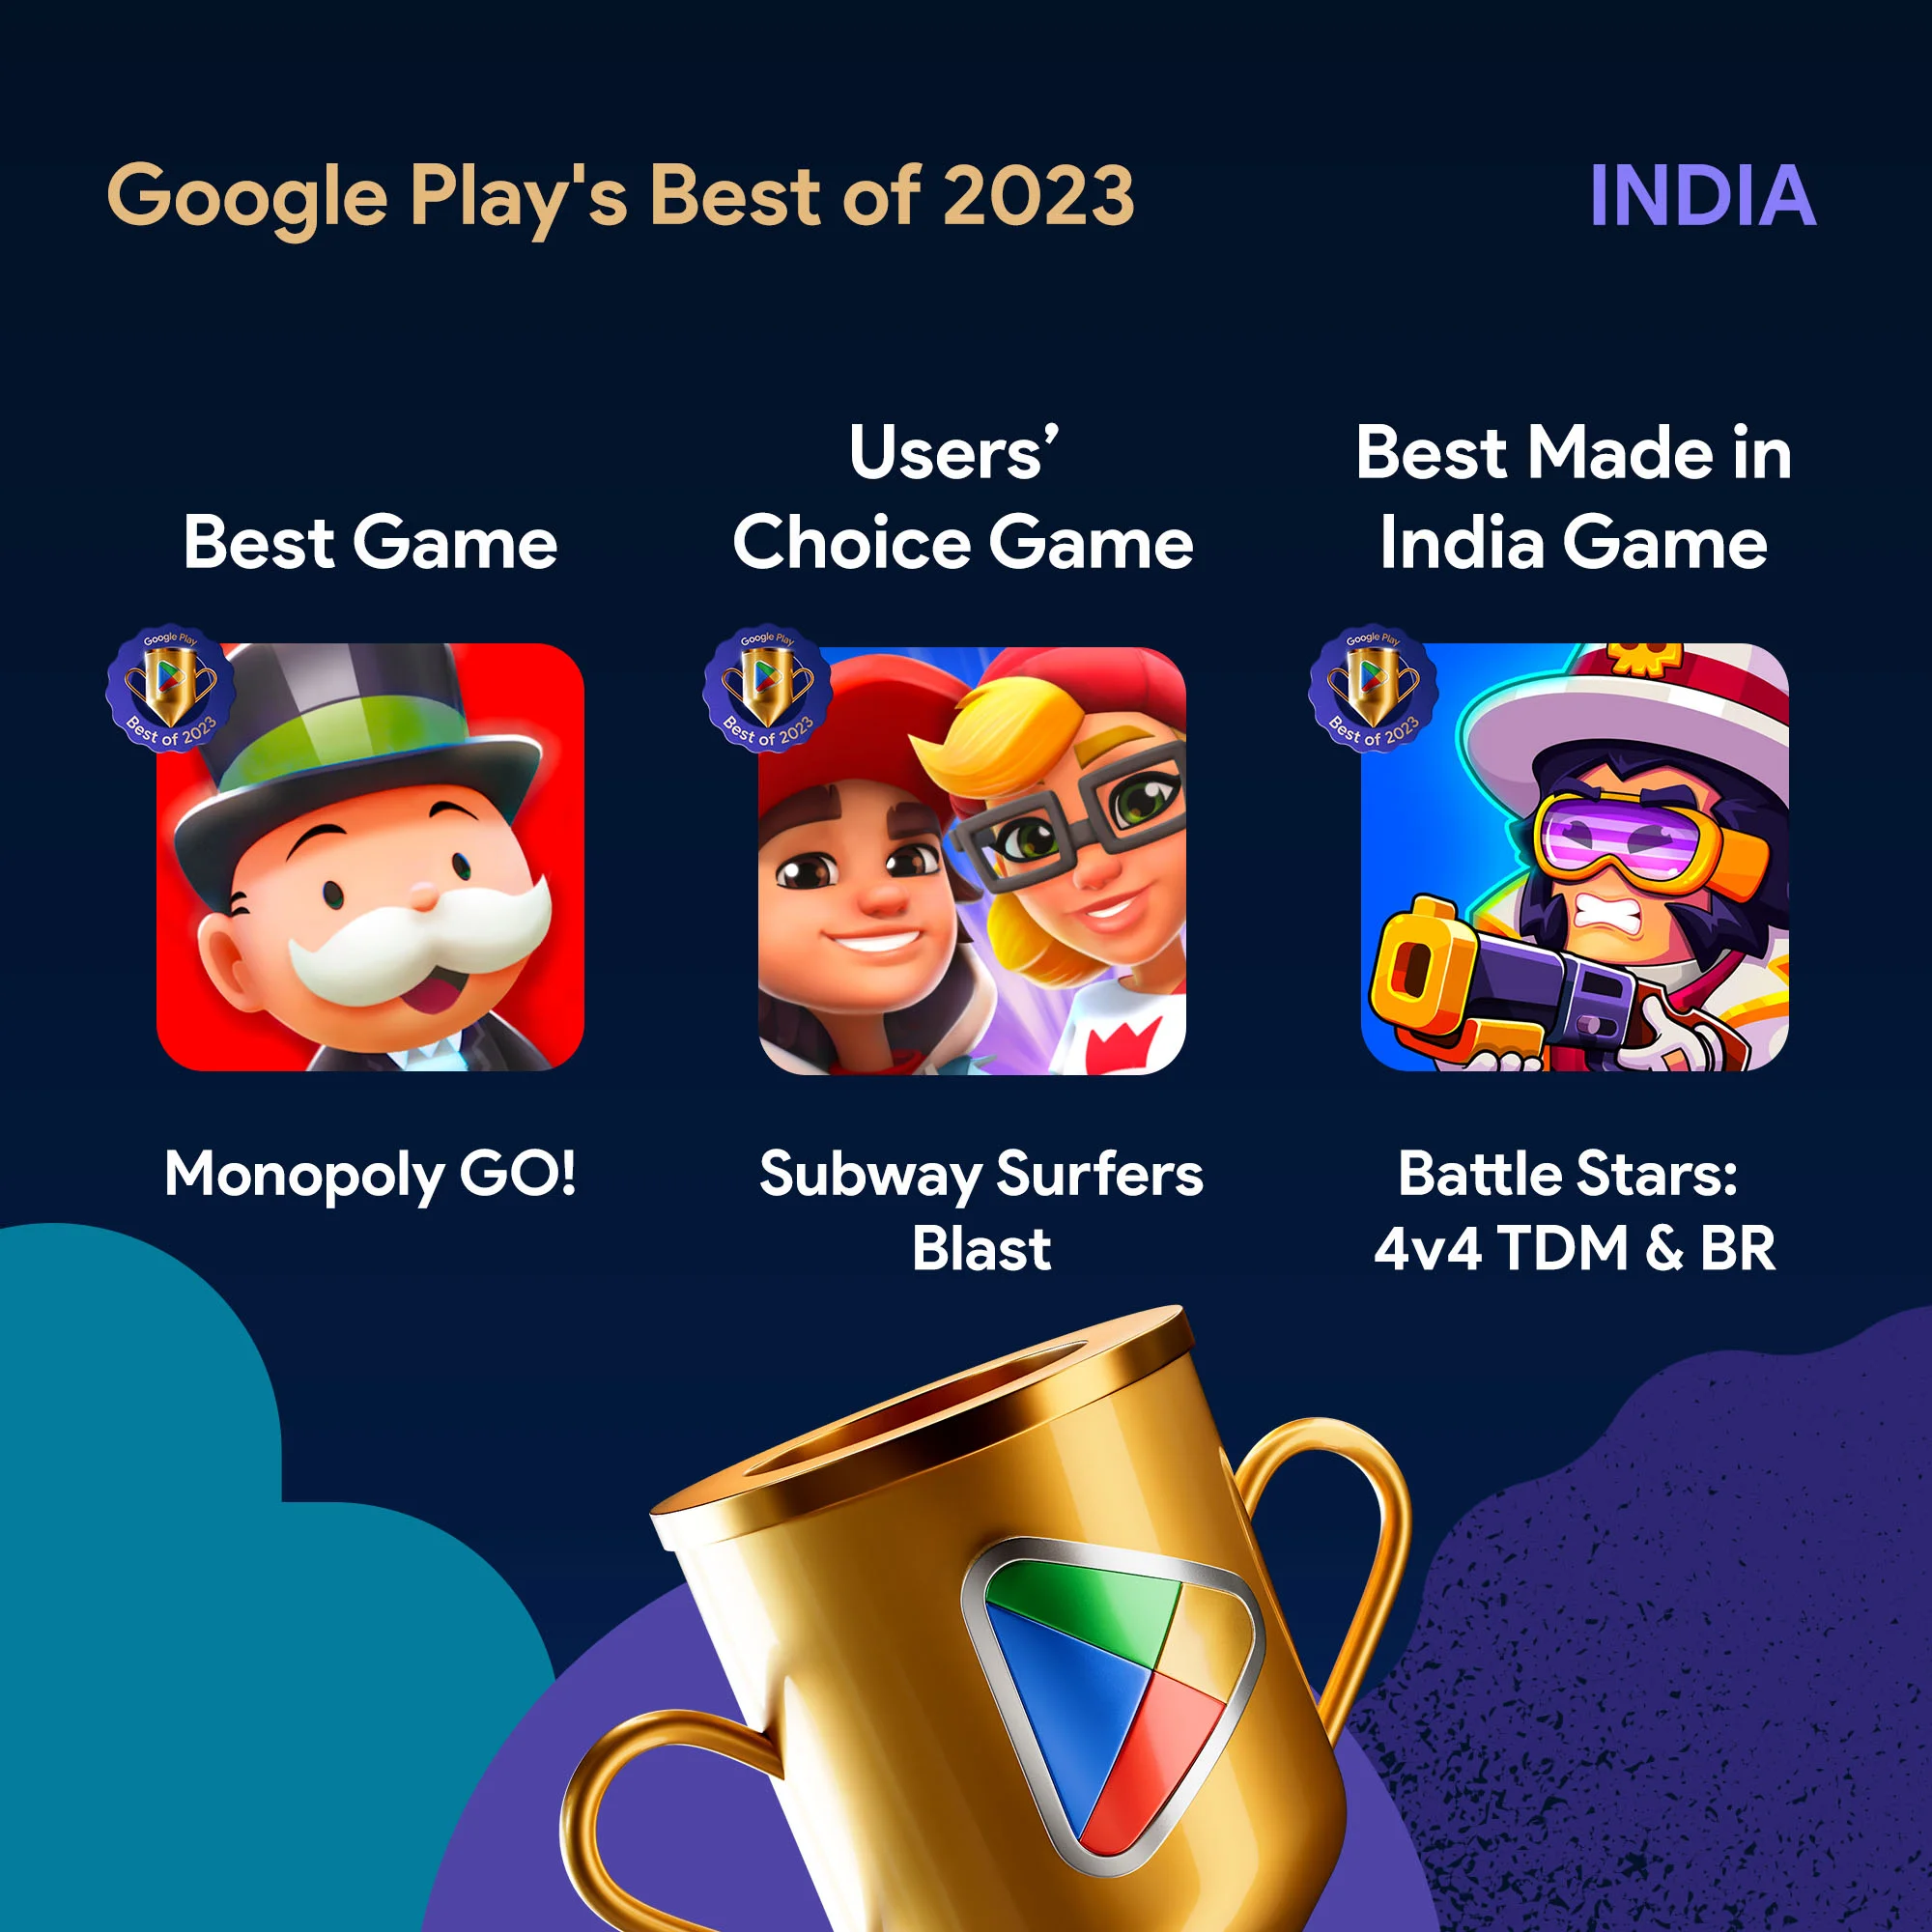 Google Play Best of 2023 Monopoly GO! and Level SuperMind crowned Best